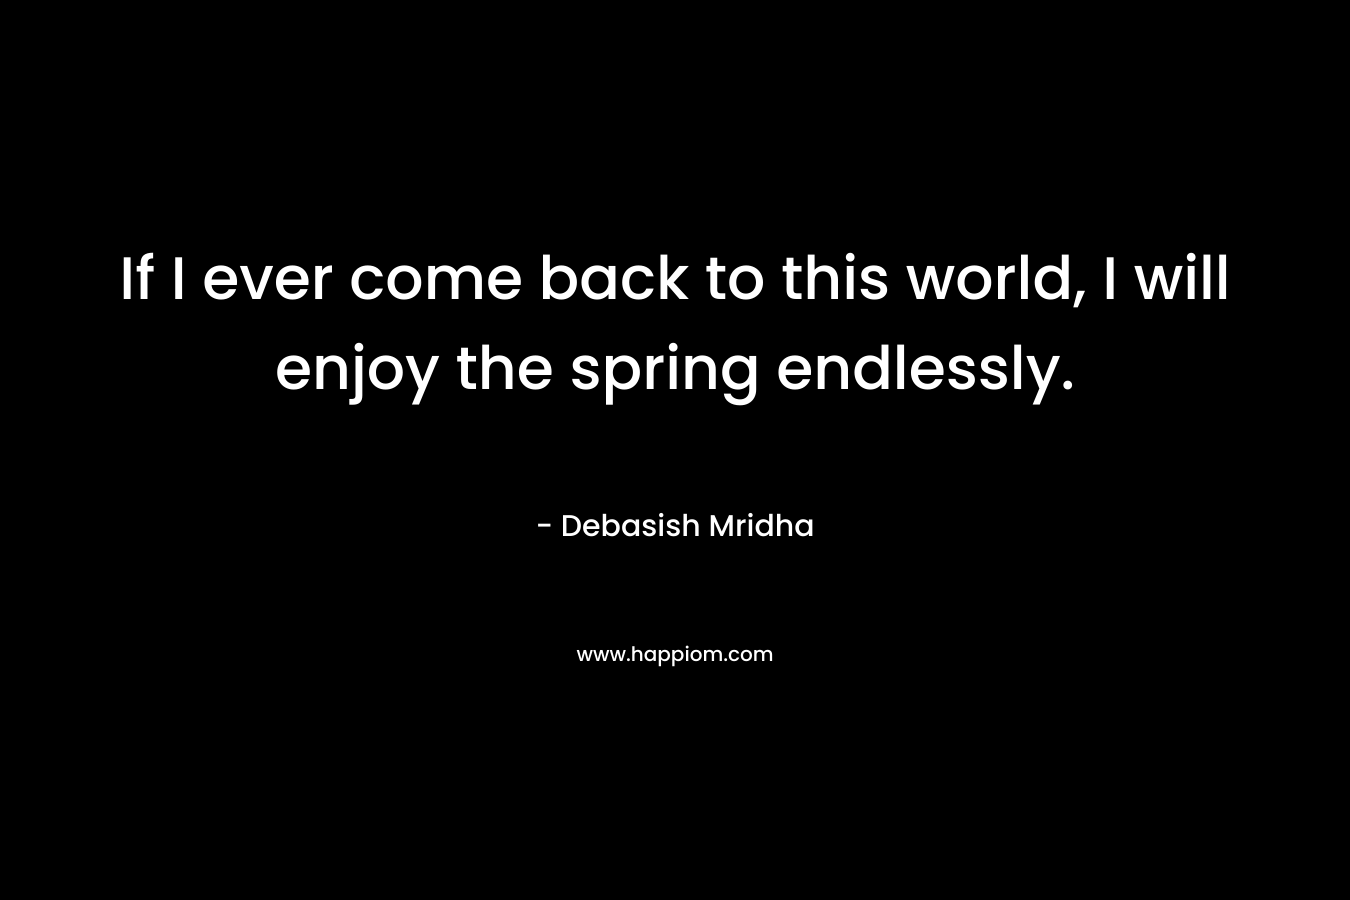 If I ever come back to this world, I will enjoy the spring endlessly.